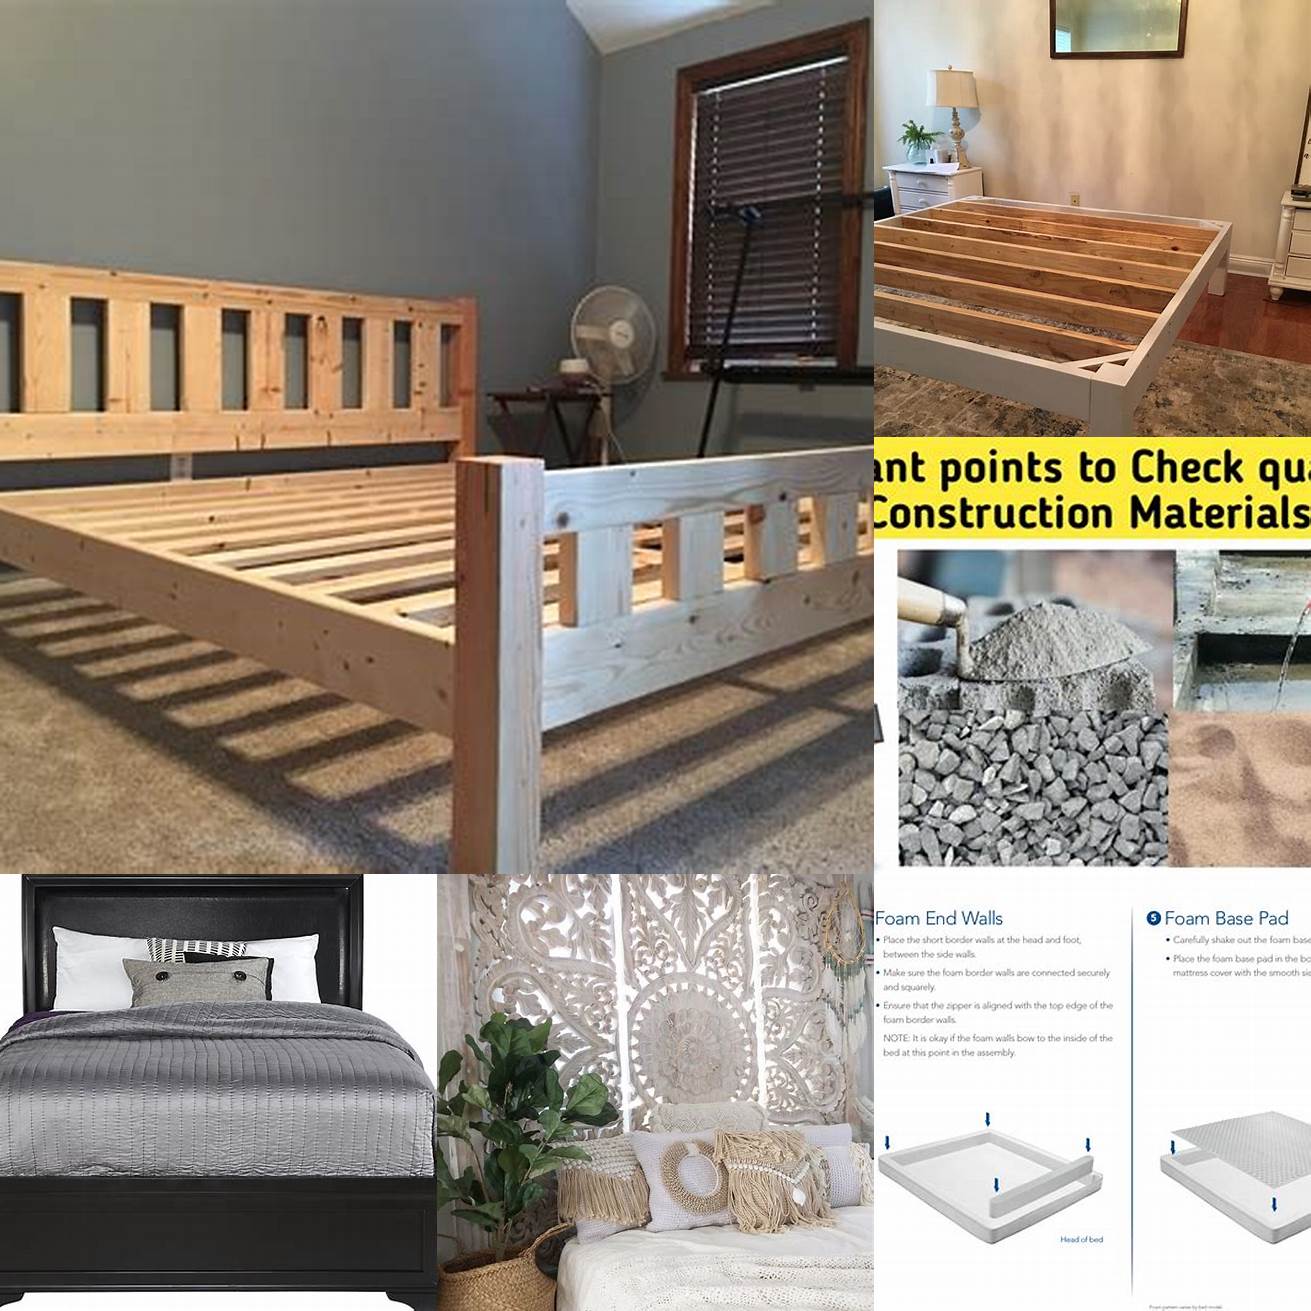 Check the materials Make sure to read the product description carefully to ensure that the bed is made with high-quality materials and construction